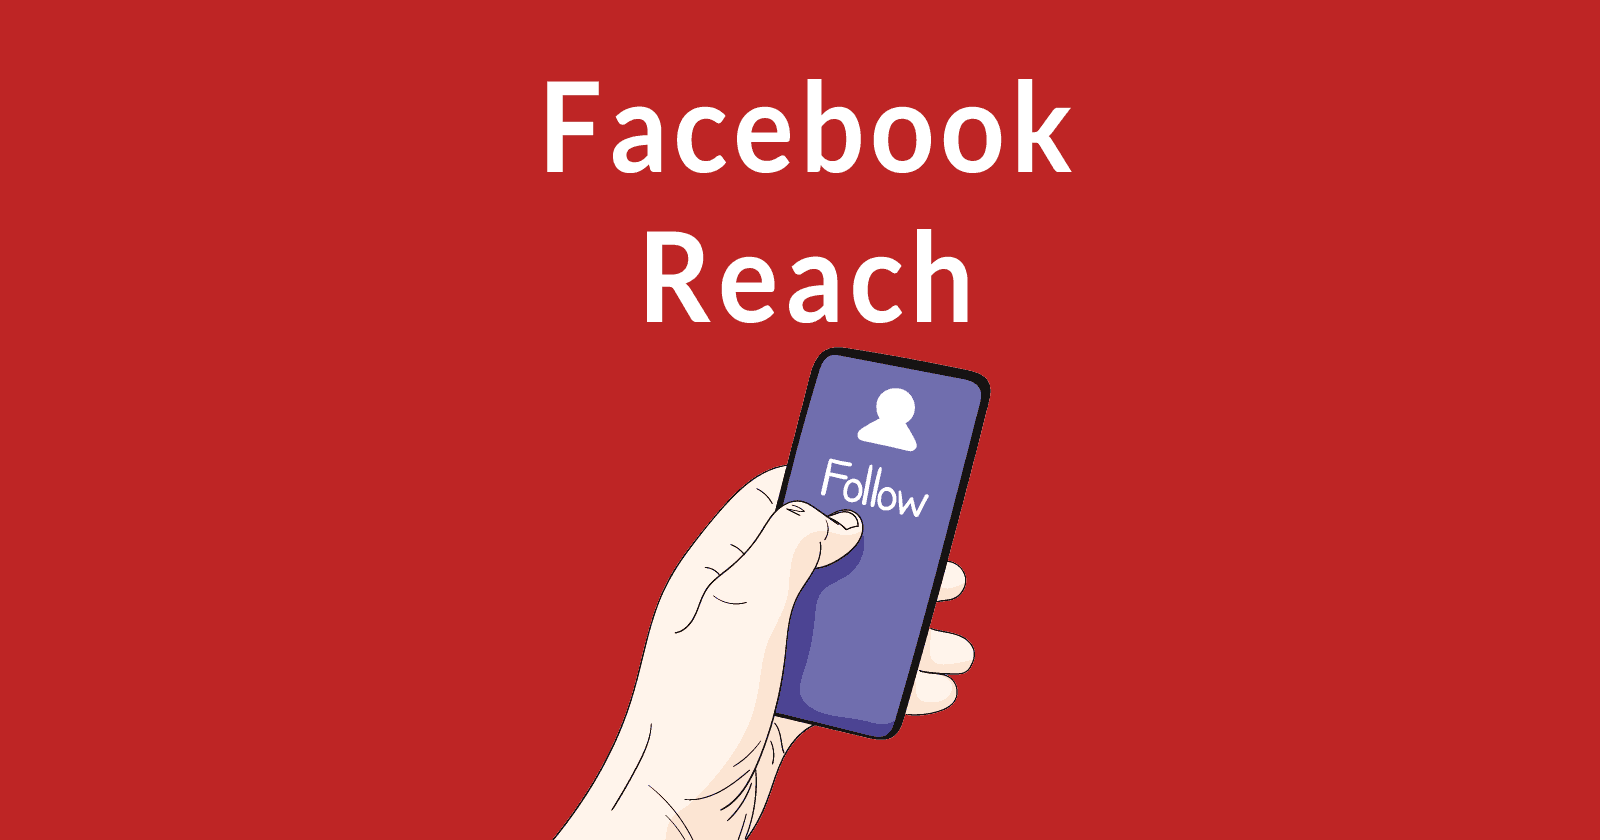 Image of a hand holding a cell phone with the word "follow" on the screen. The words Facebook Reach are written above the image